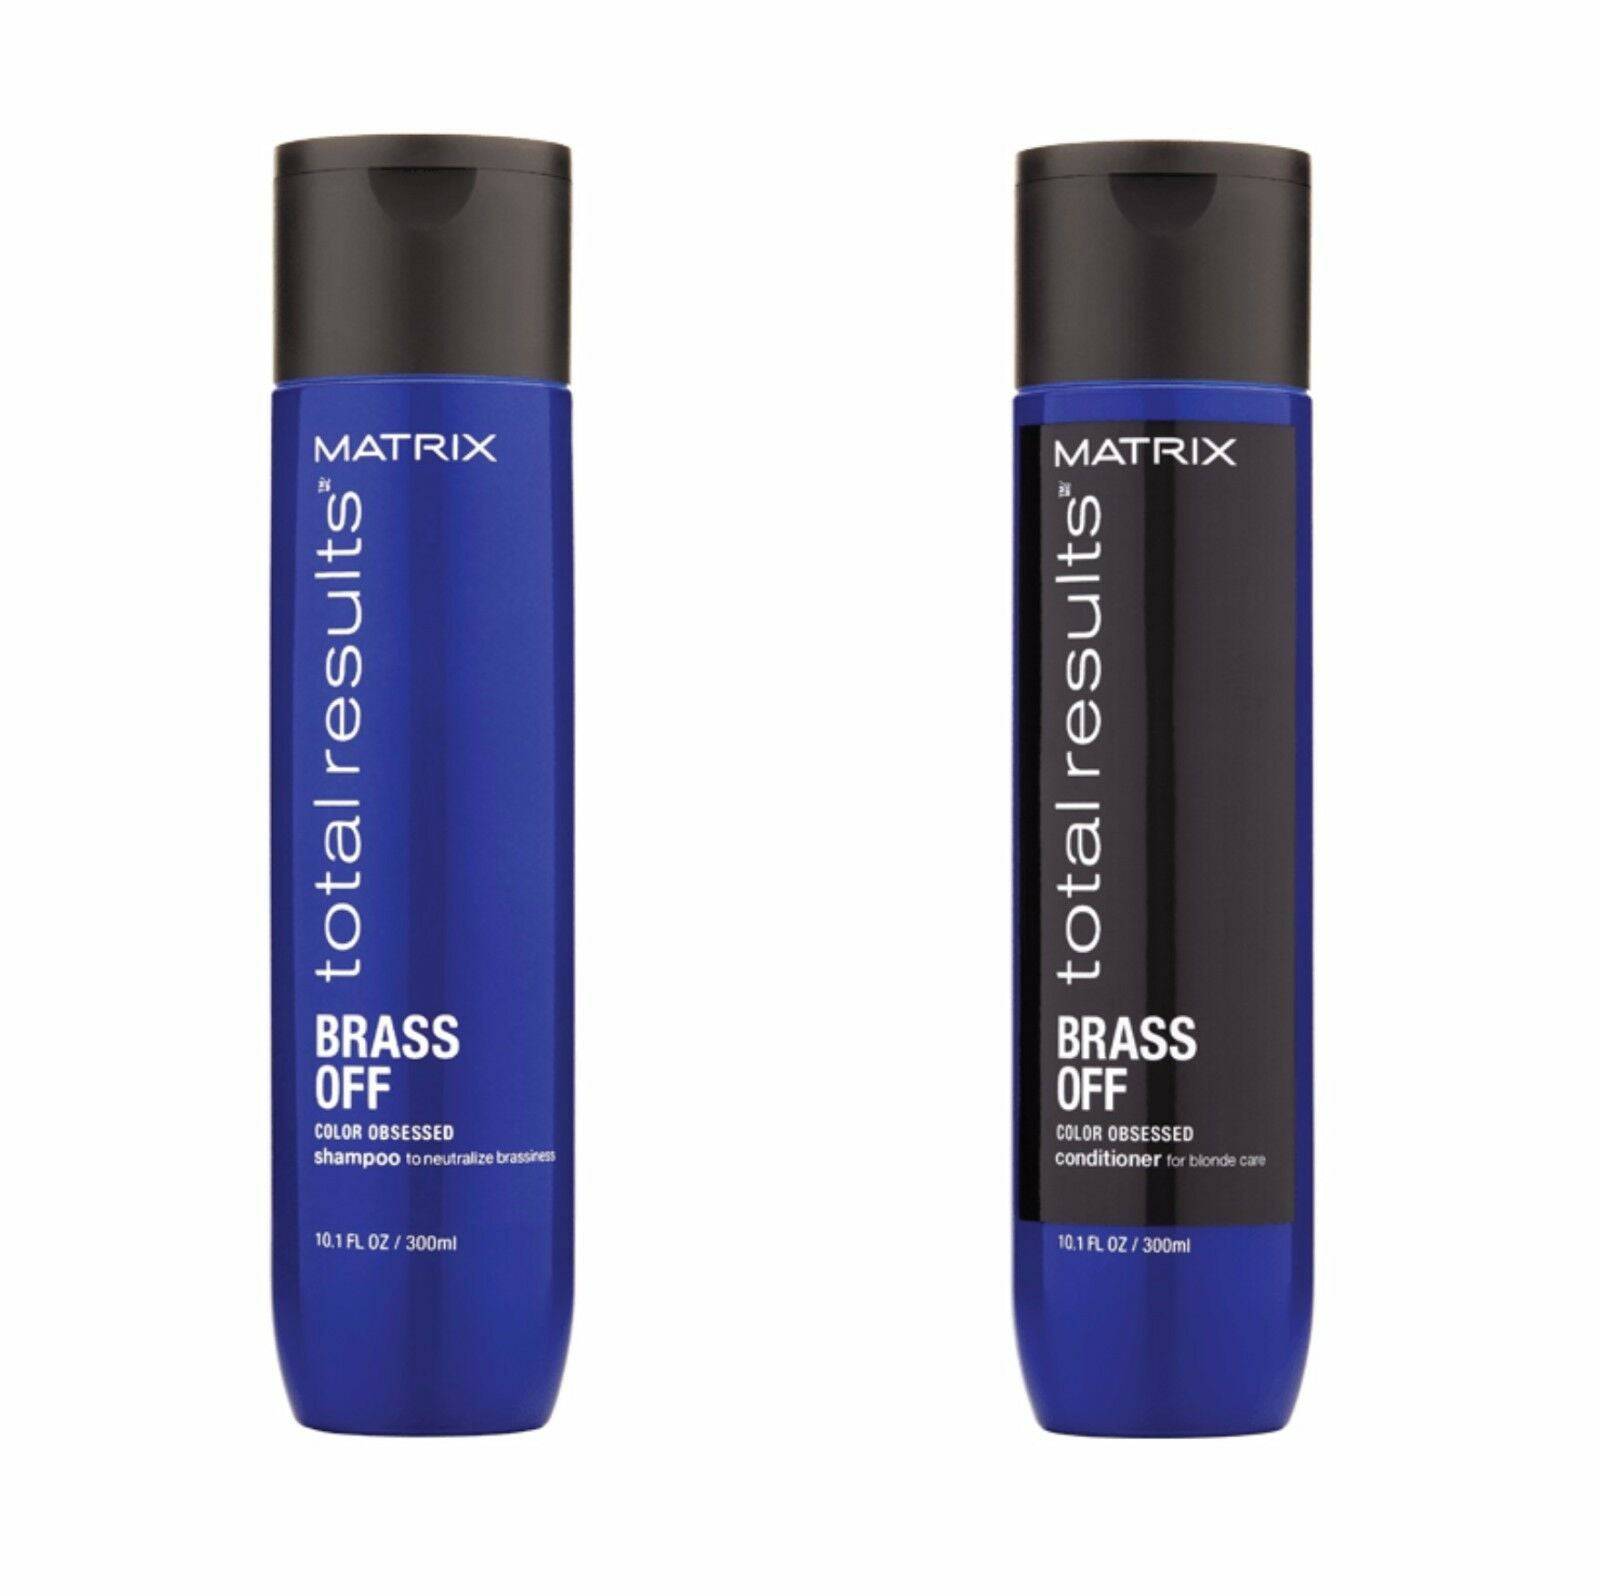 Matrix Total Results Brass Off duo shampoo & Conditioner Neutralize Brassy tones - On Line Hair Depot